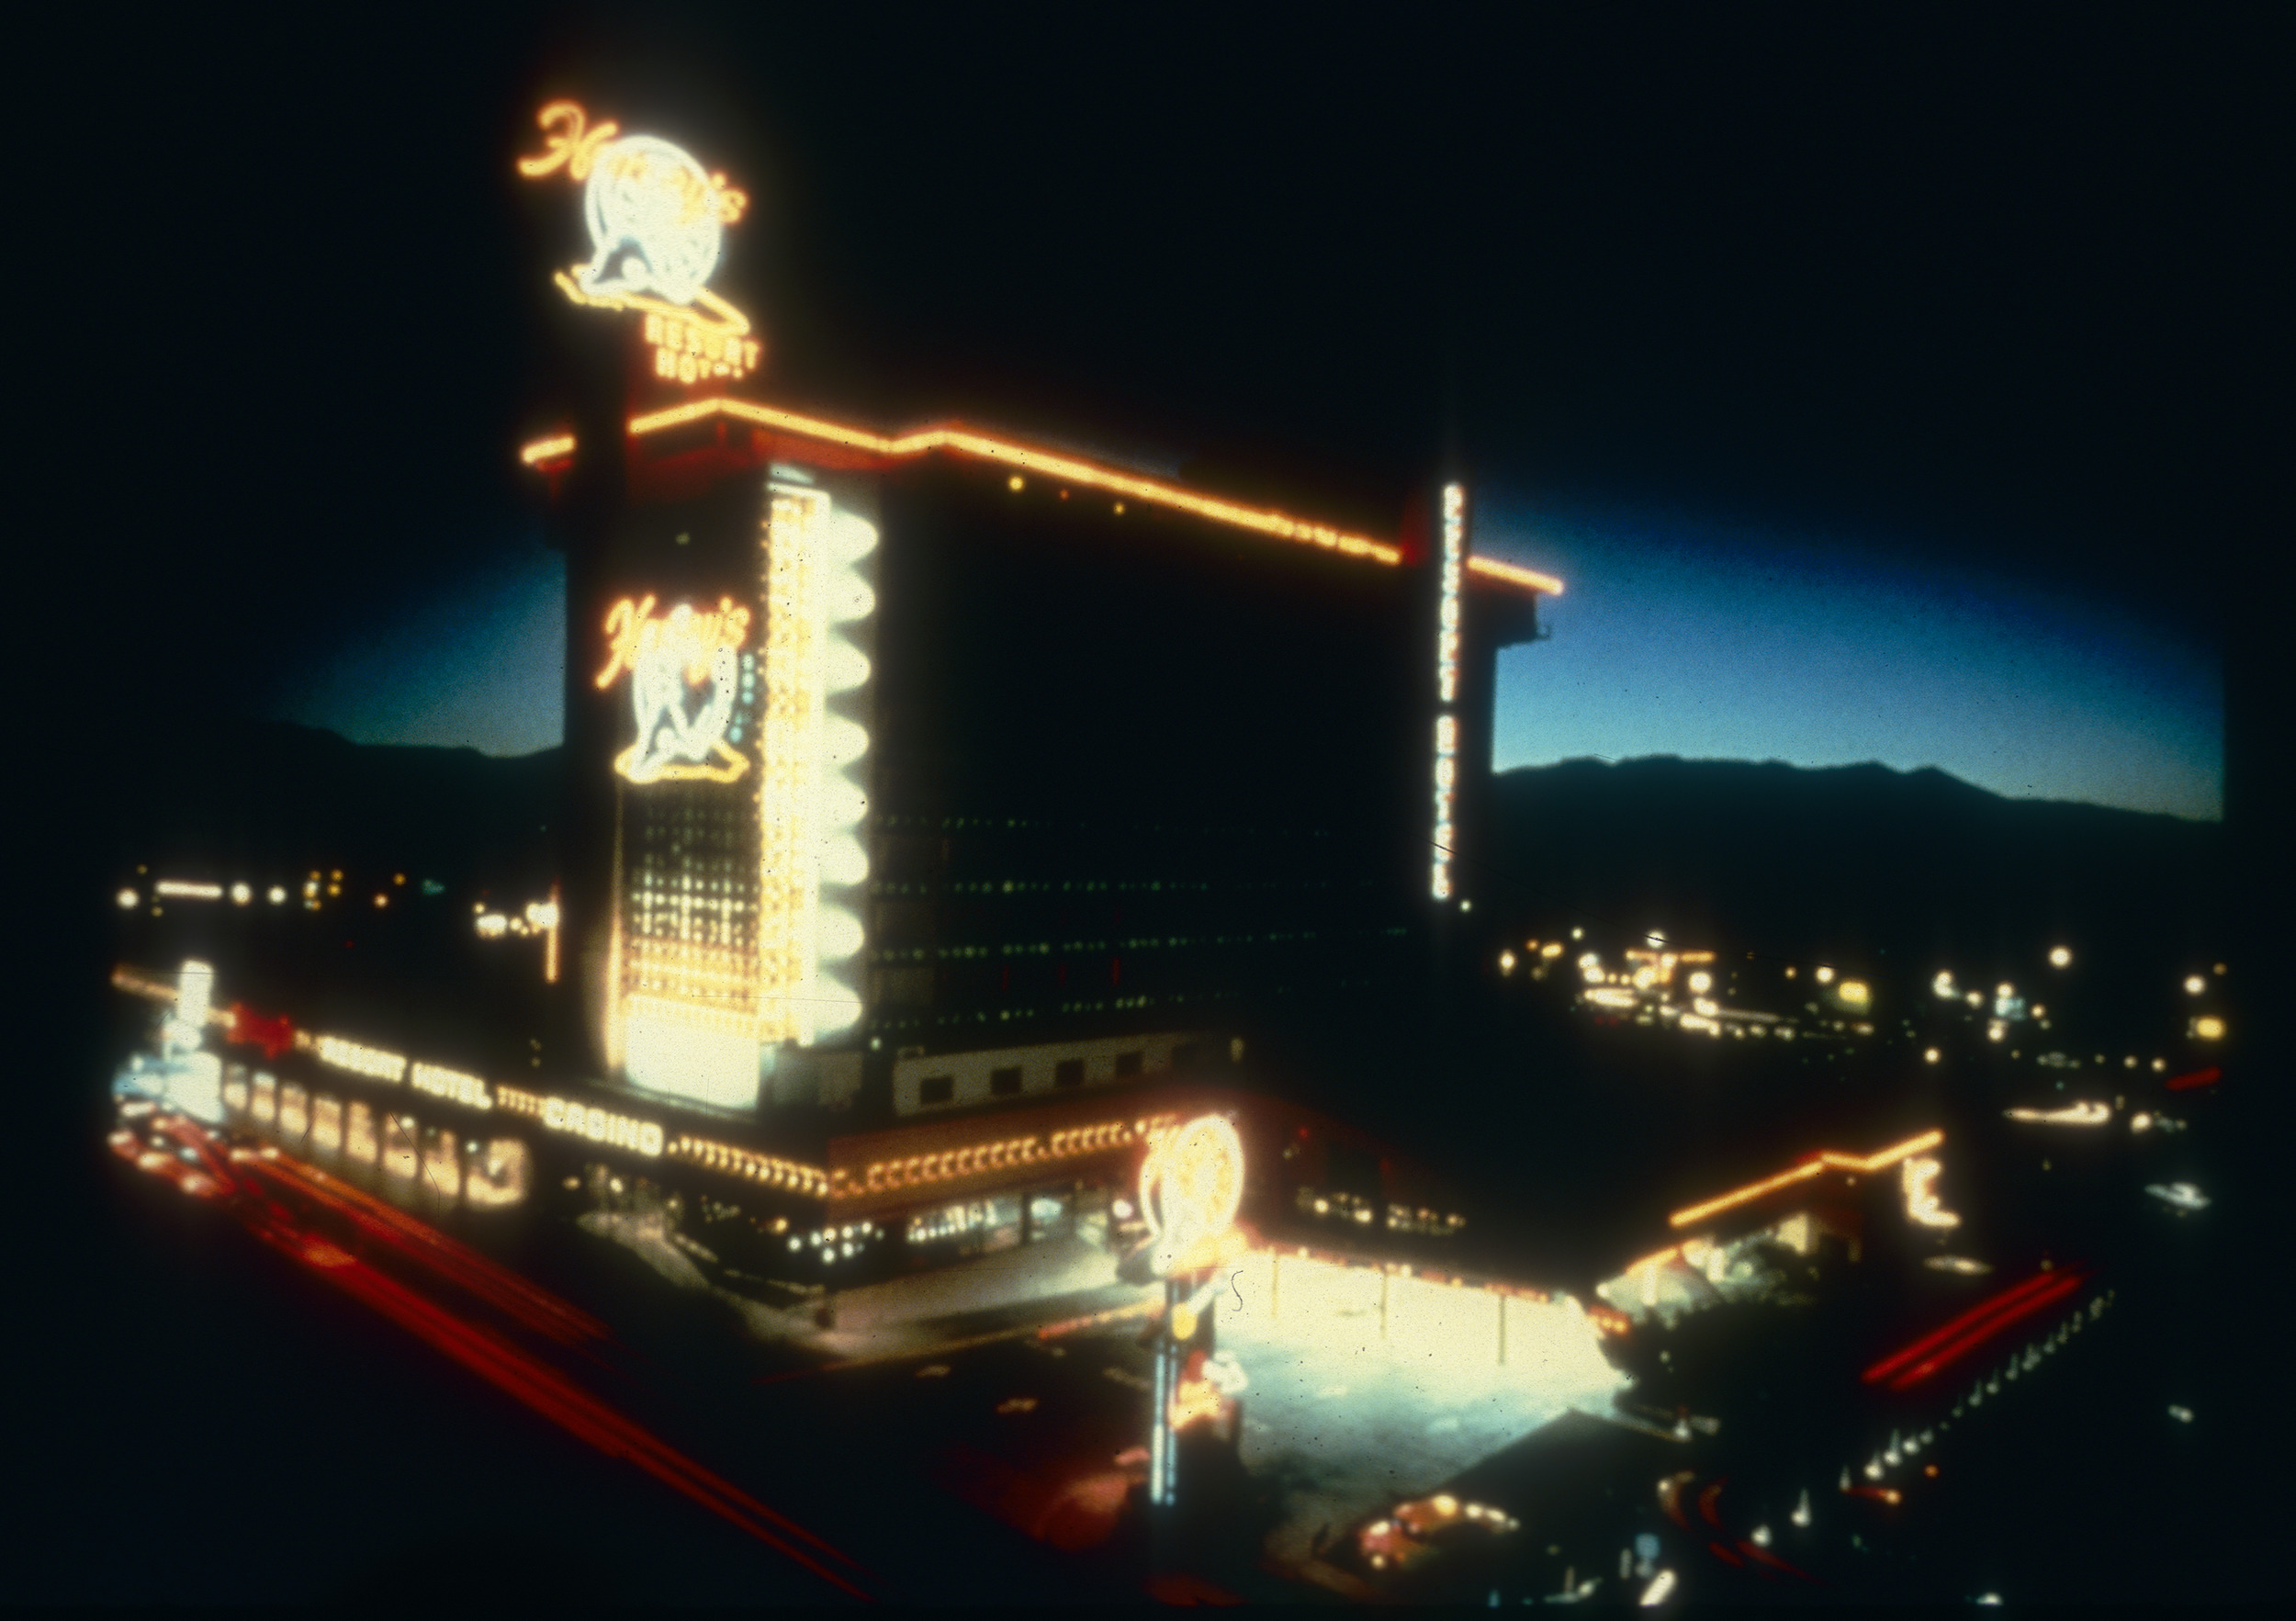 Slide of Harvey's Wagon Wheel and its neon signs, Stateline, Nevada, circa early to mid 1980s